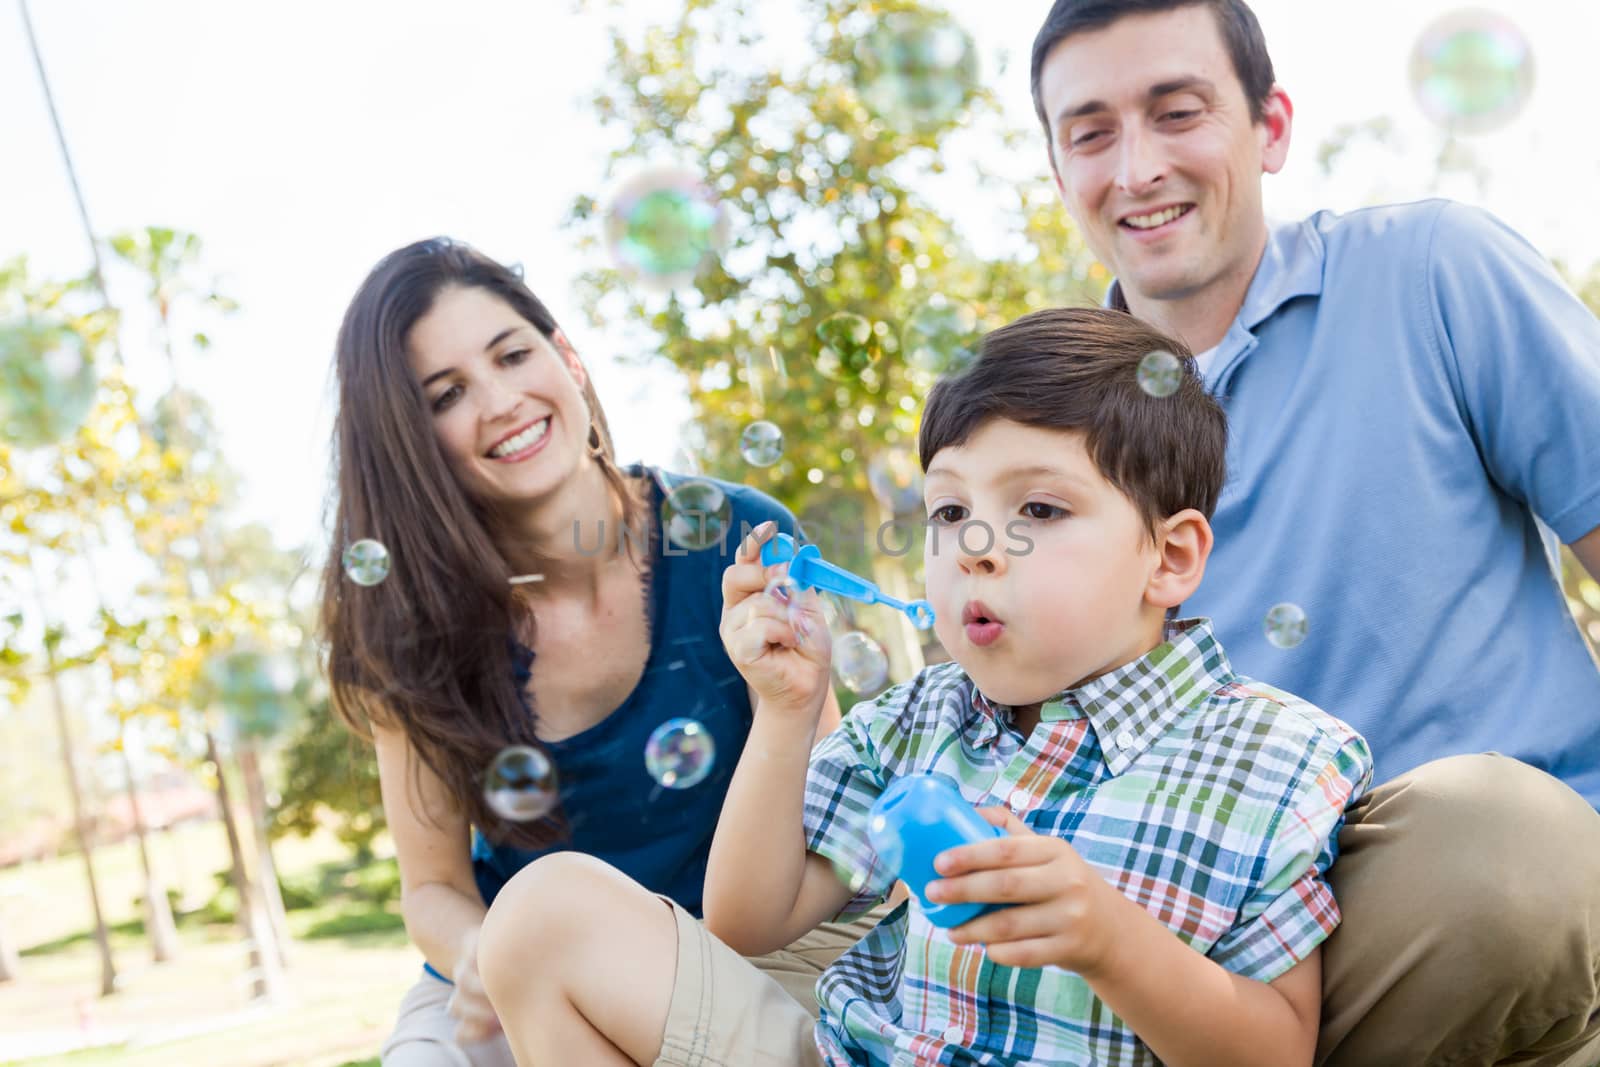 Young Boy Blowing Bubbles with His Parents in the Park.